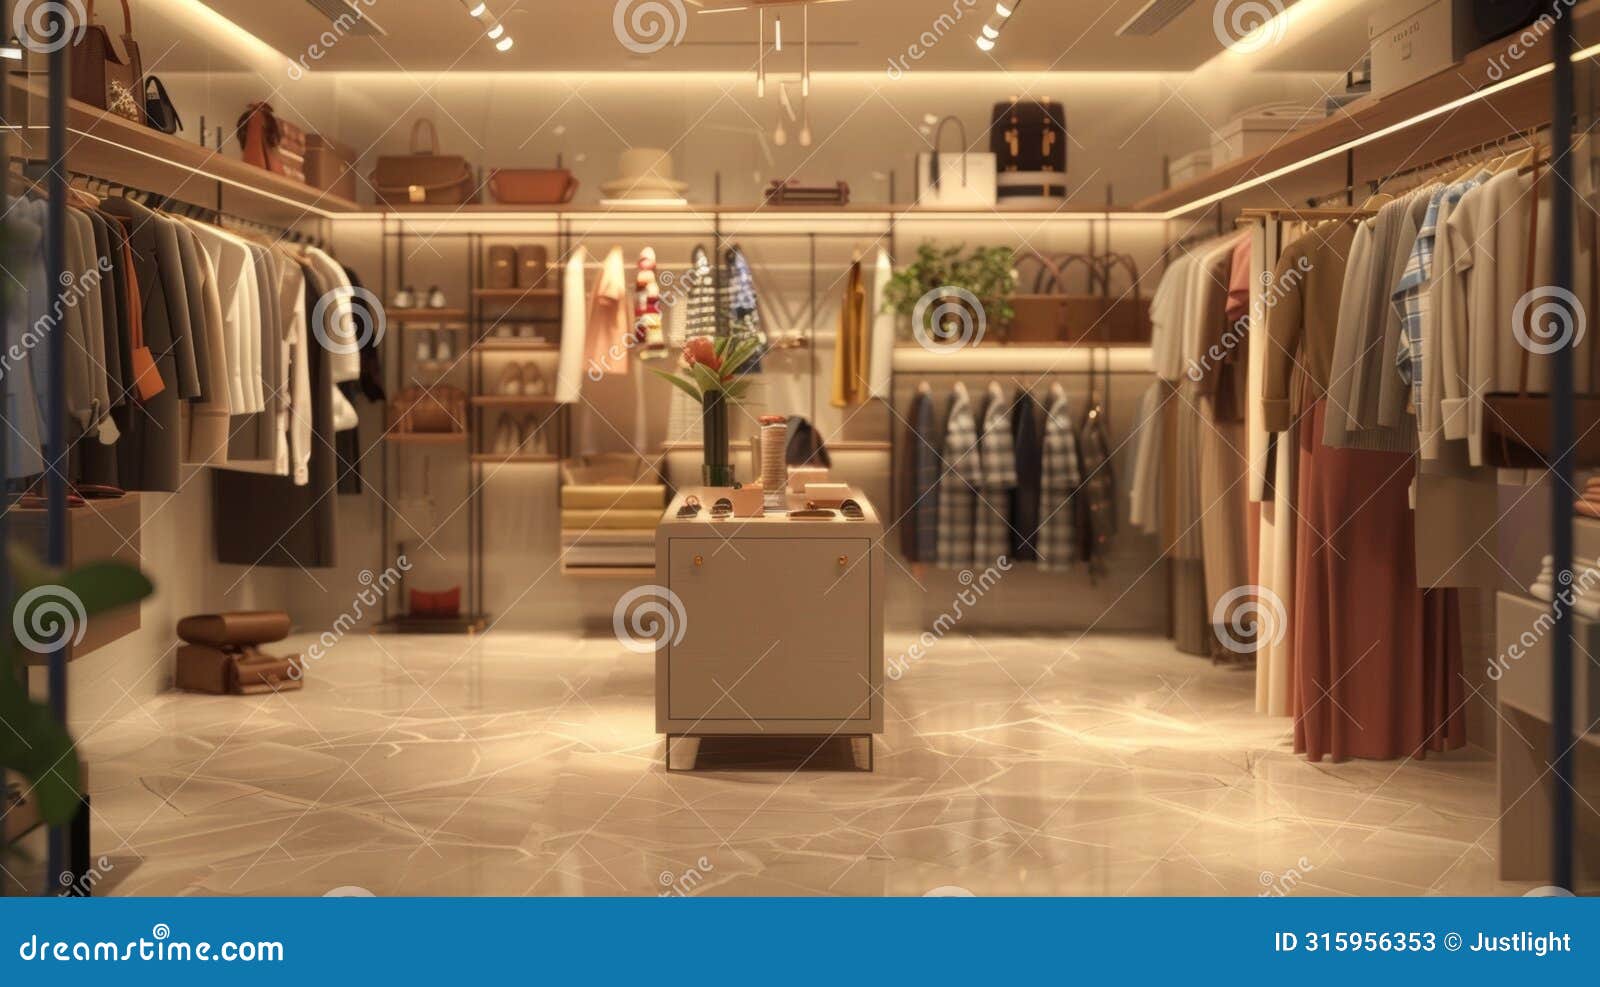 a hazy blur of racks filled with trendy outfits emphasizing the sophistication and style of the boutiques wardrobe